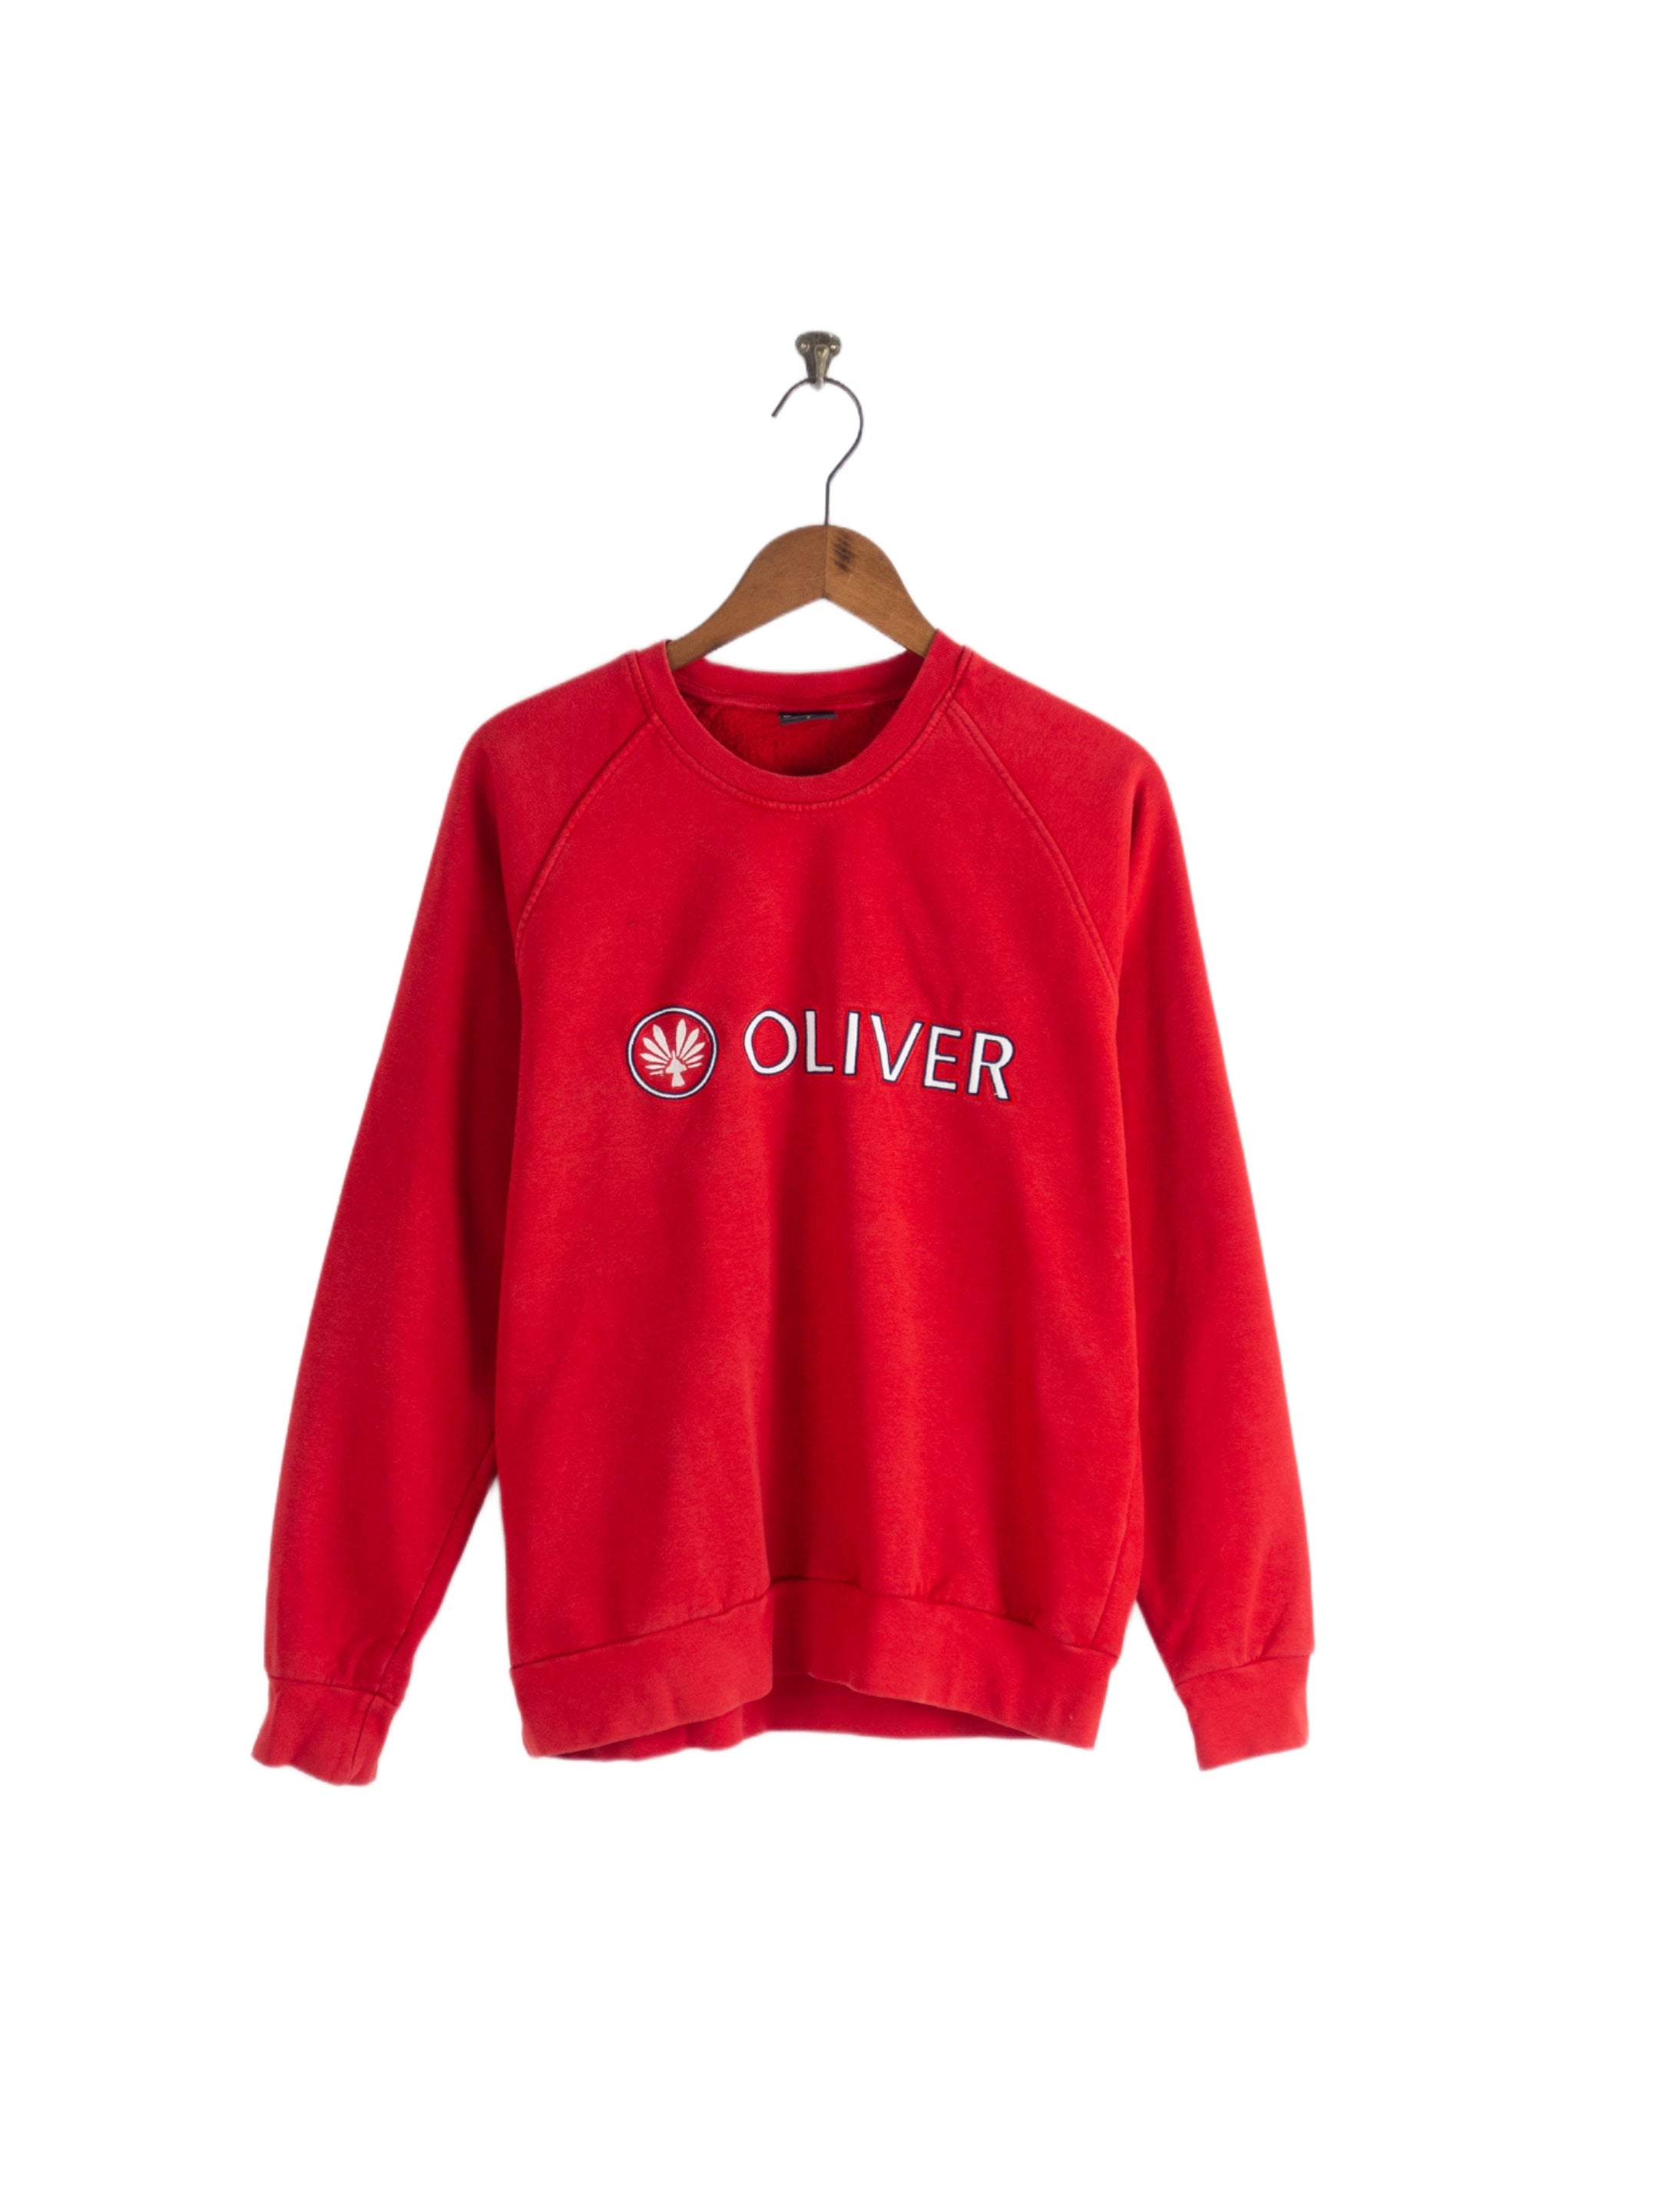 Oliver Sweater S/M